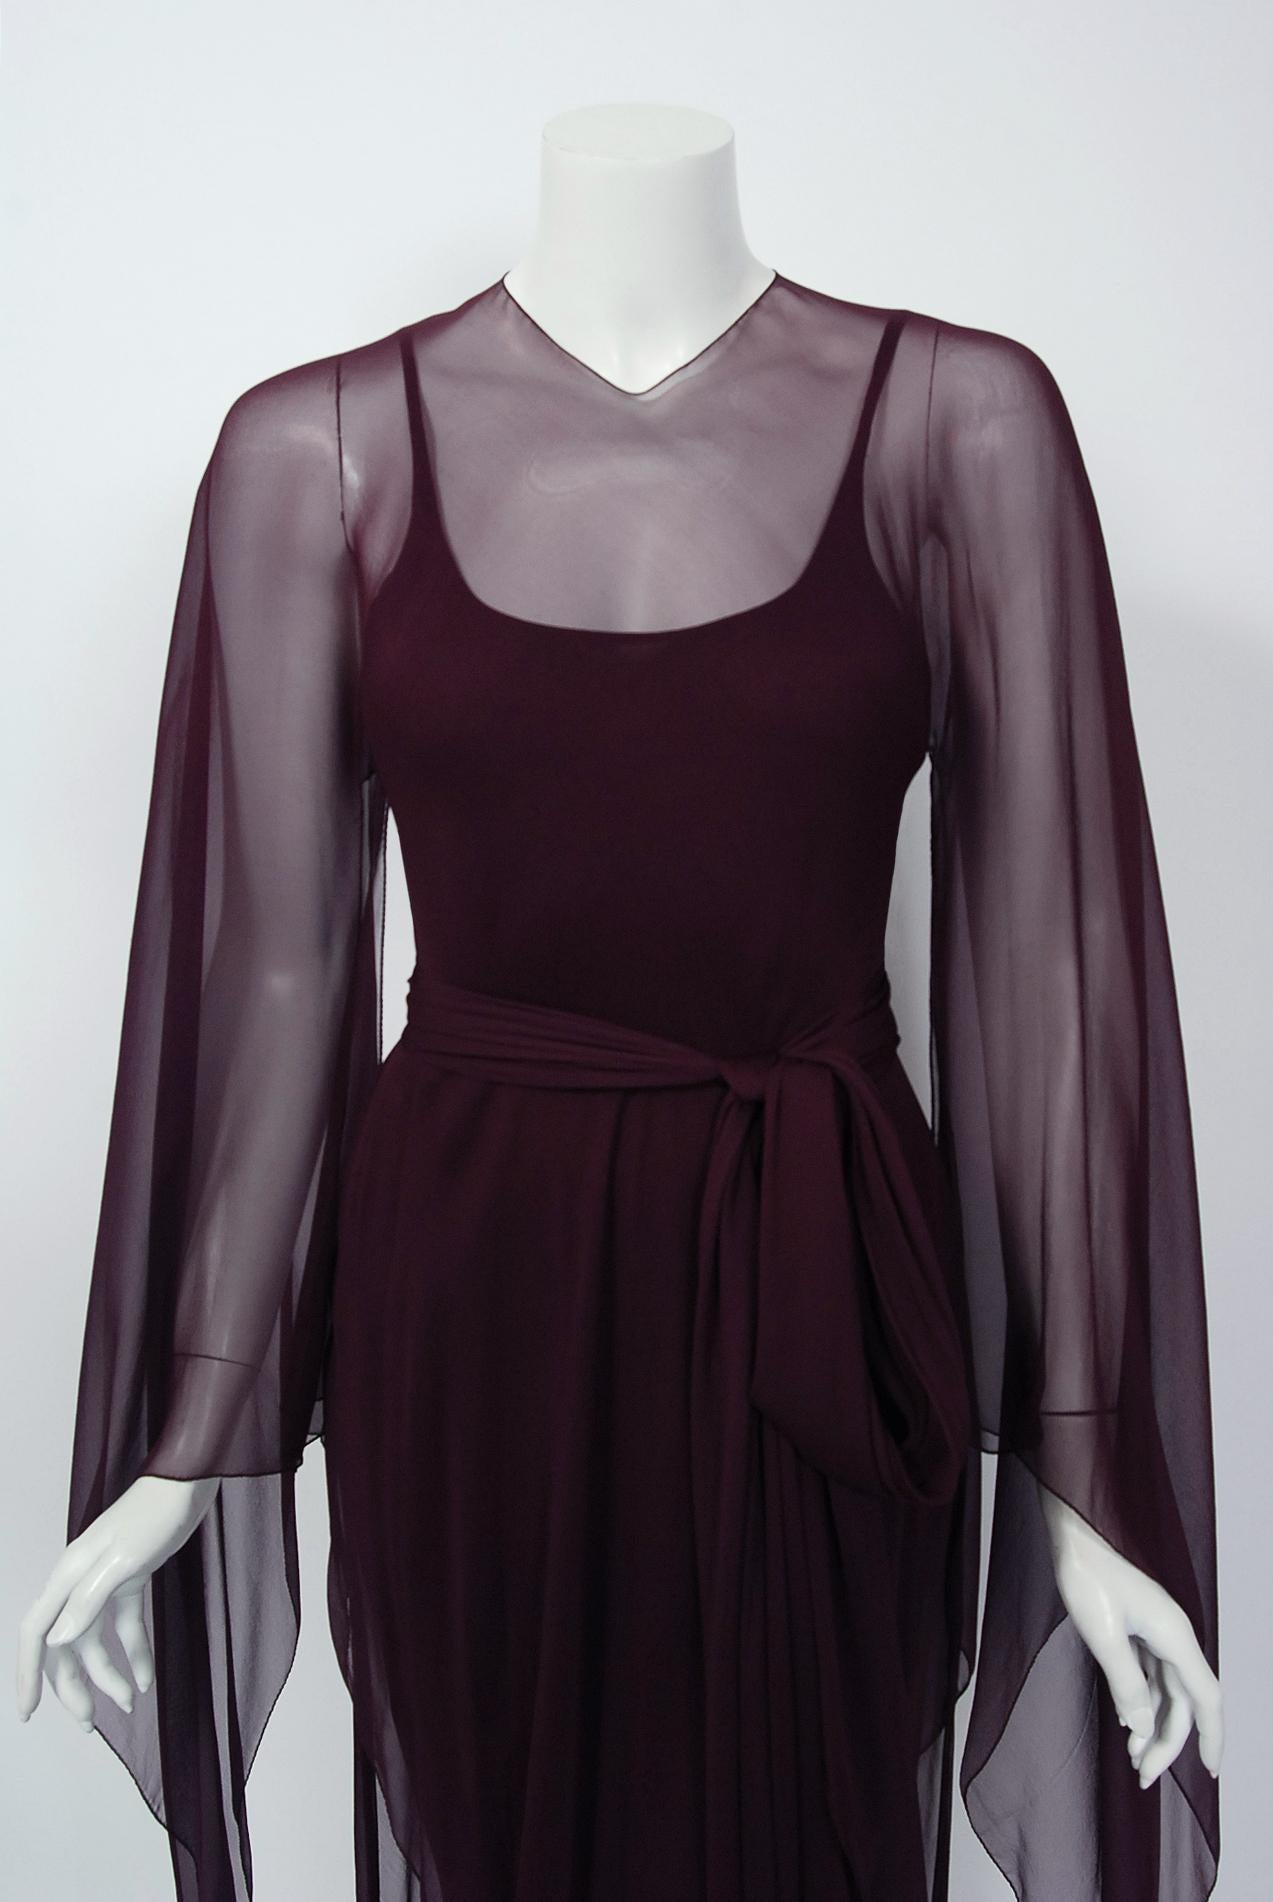 Gorgeous Halston Couture belted bias cut dress dating back to the mid 1970's Throughout most of the seventies he epitomized the glamour, as well as the decadence of the era, becoming a central figure in the nightlife scene of New York's Studio 54.